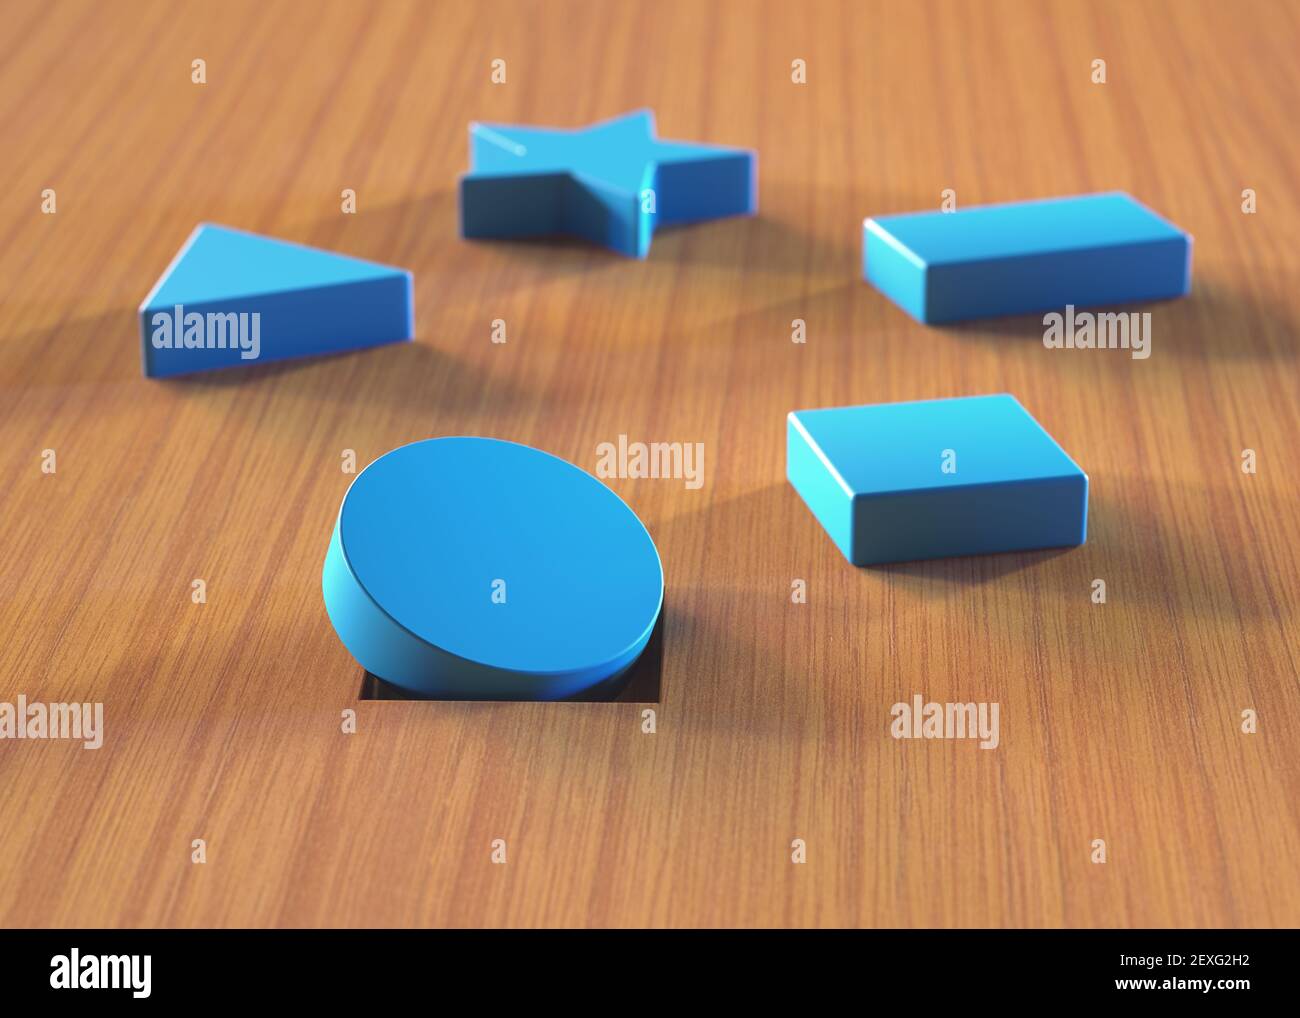 Wrong piece in the hole. Assorted blue blocks on wooden table. Educational toy and psychological test. Stock Photo